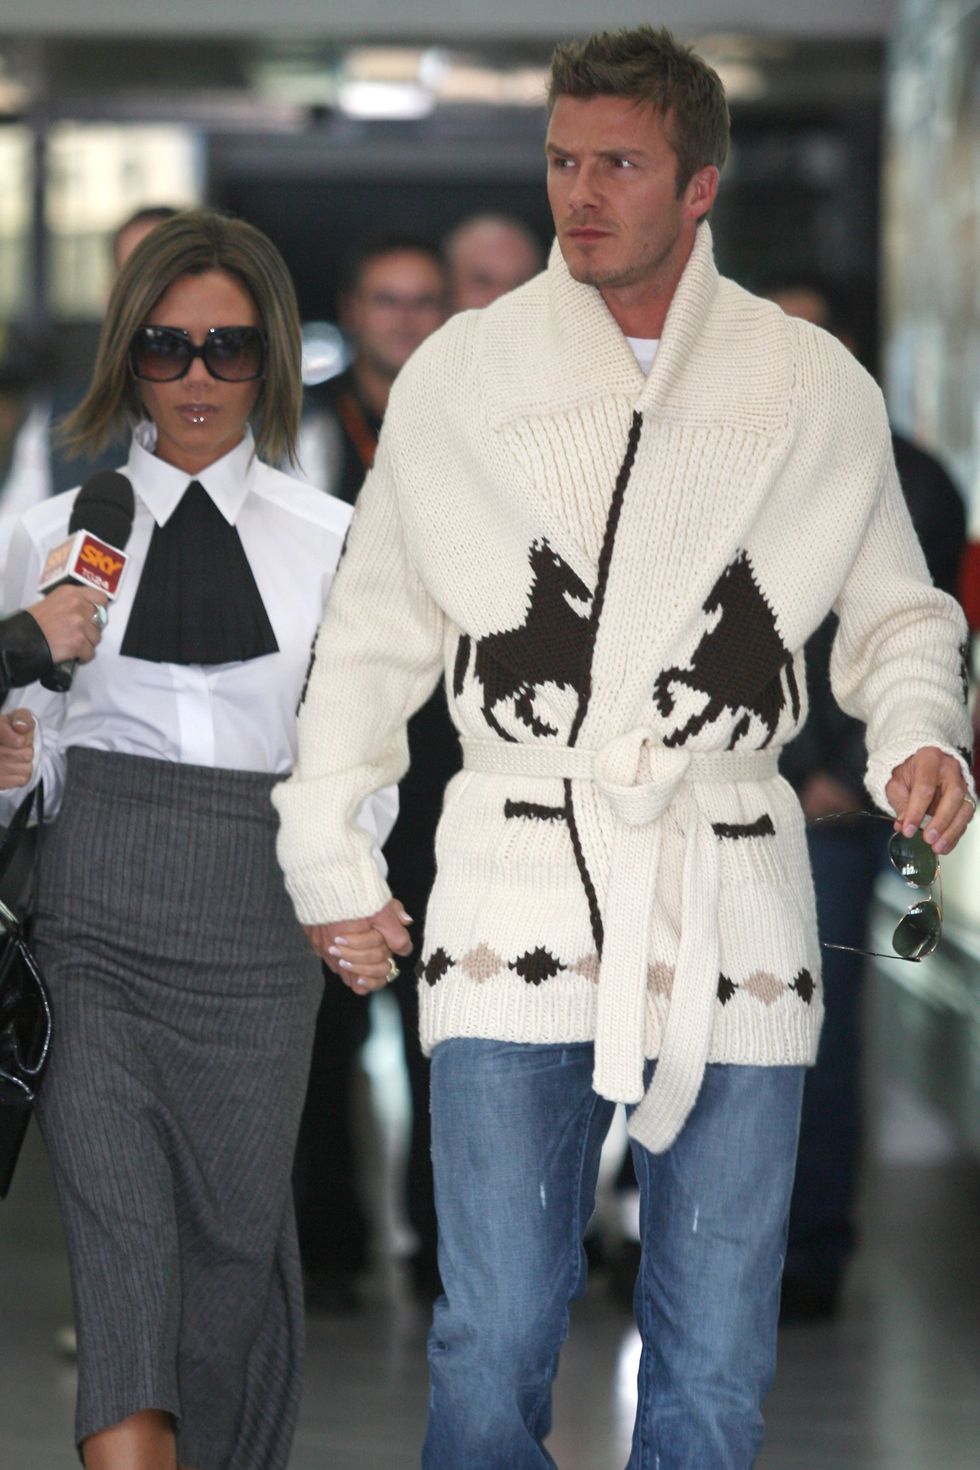 rome, italy november 17 david and victoria beckham arrive at ciampino airport for katie holmes and tom cruise wedding at bracciano on november 17, 2006 in rome, italy photo giuseppe cacacegetty images